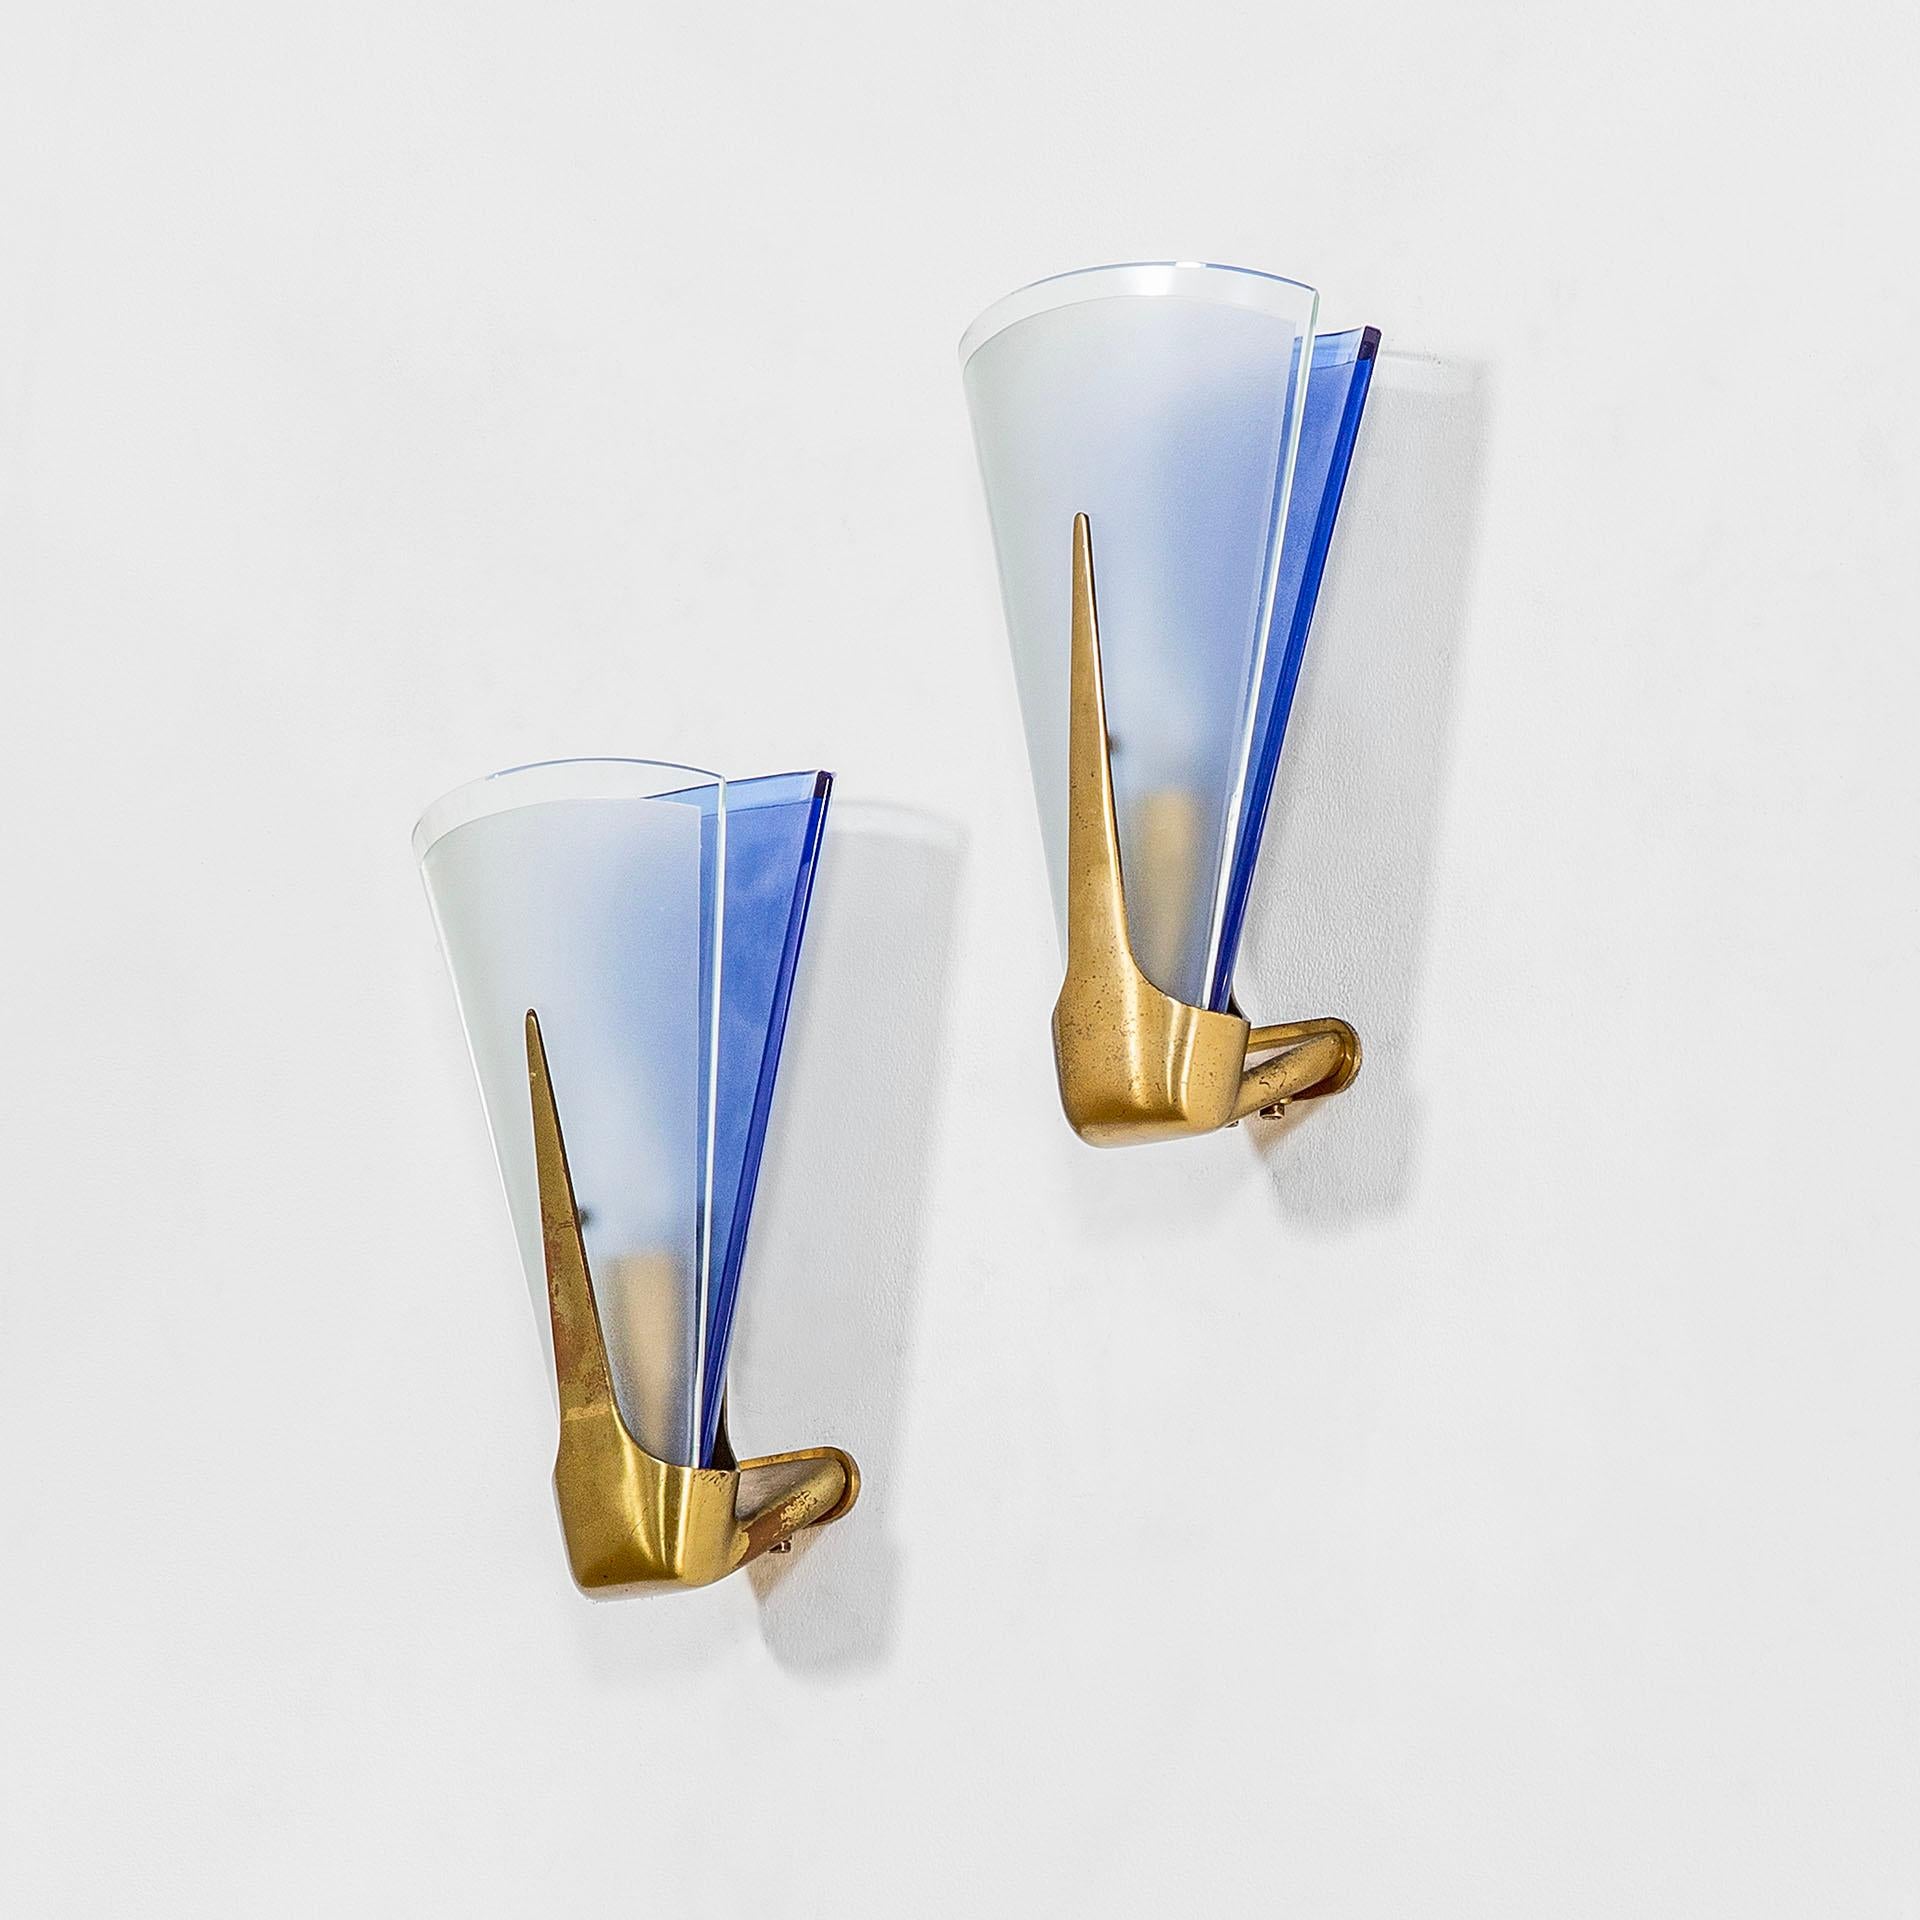 Italian 20th Century Max Ingrand Pair of Blue Wall Lamps in Crystal for Fontana Art, 50s For Sale